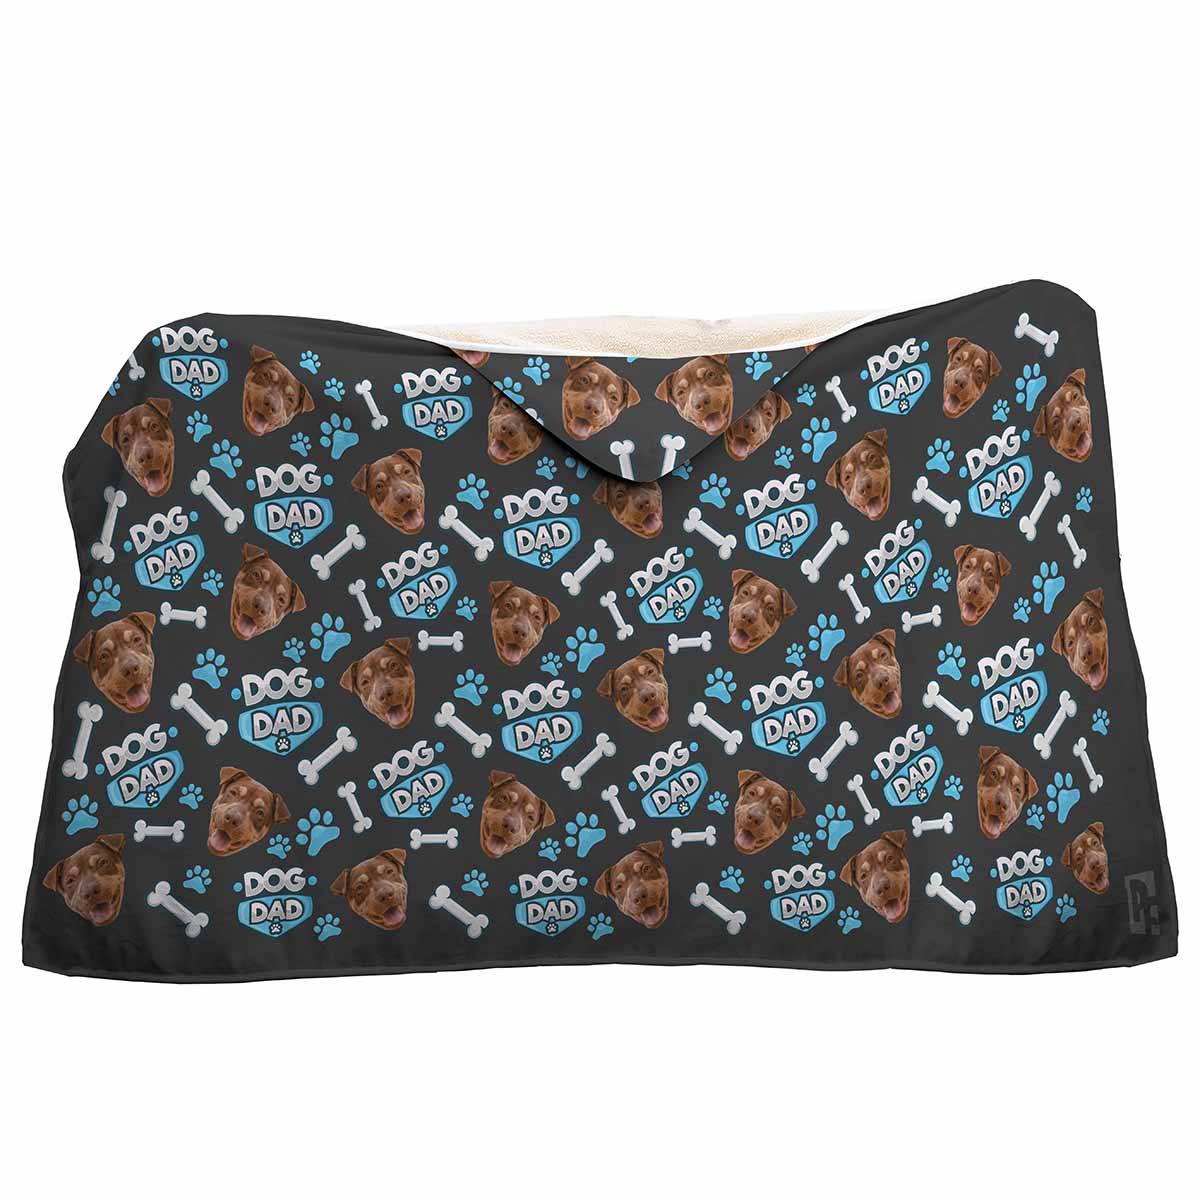 Dog Dad Personalized Hooded Blanket